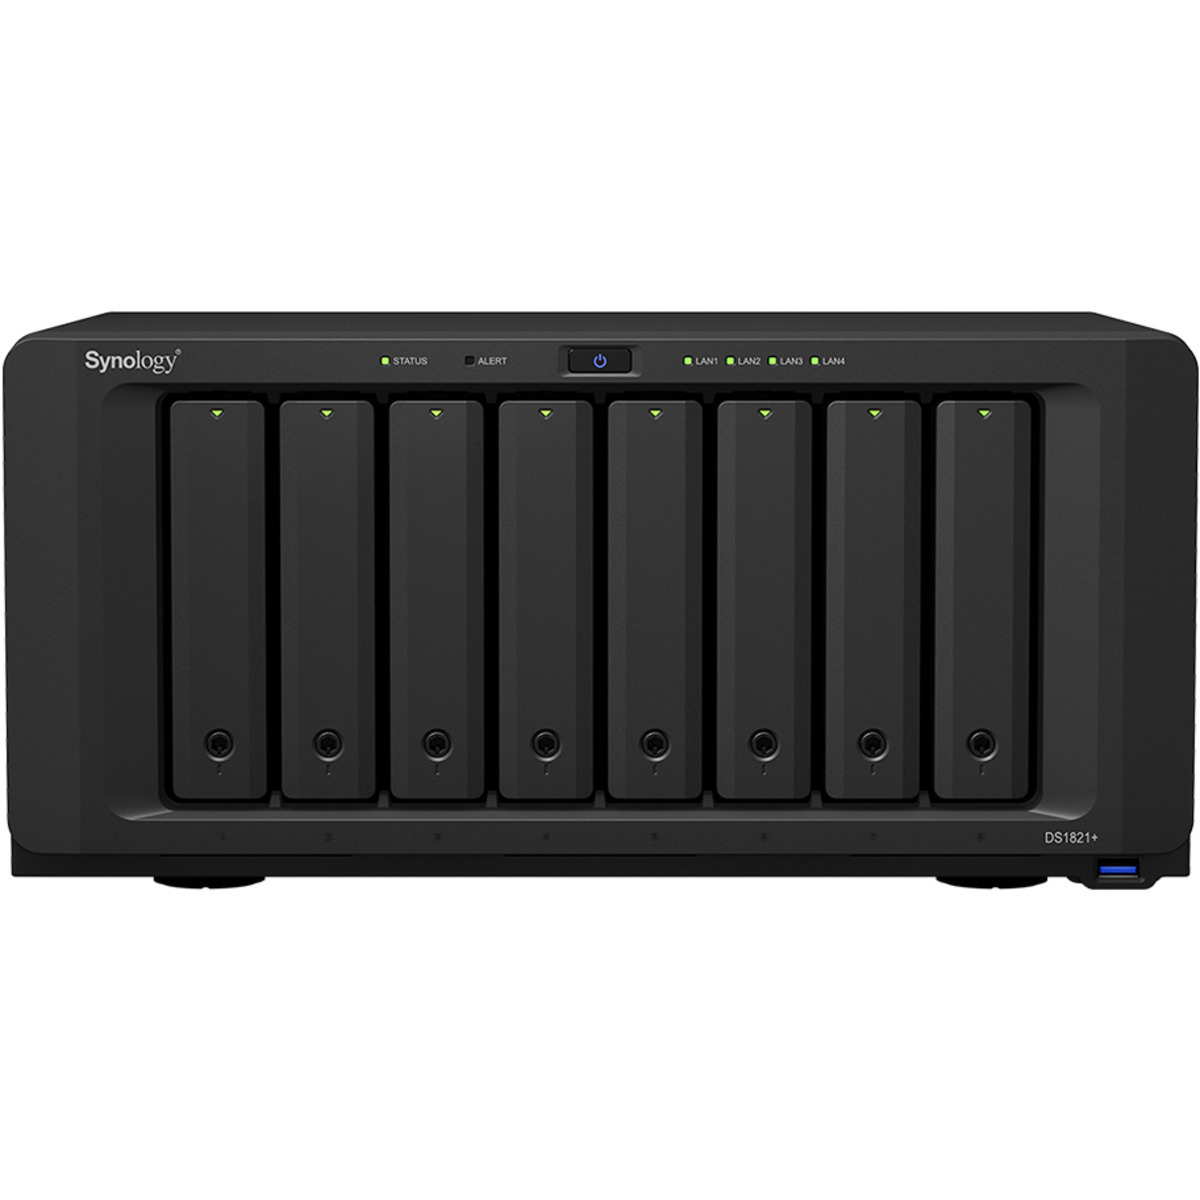 Synology DiskStation DS1821+ Desktop 8-Bay Multimedia / Power User / Business NAS - Network Attached Storage Device Burn-In Tested Configurations - FREE RAM UPGRADE DiskStation DS1821+